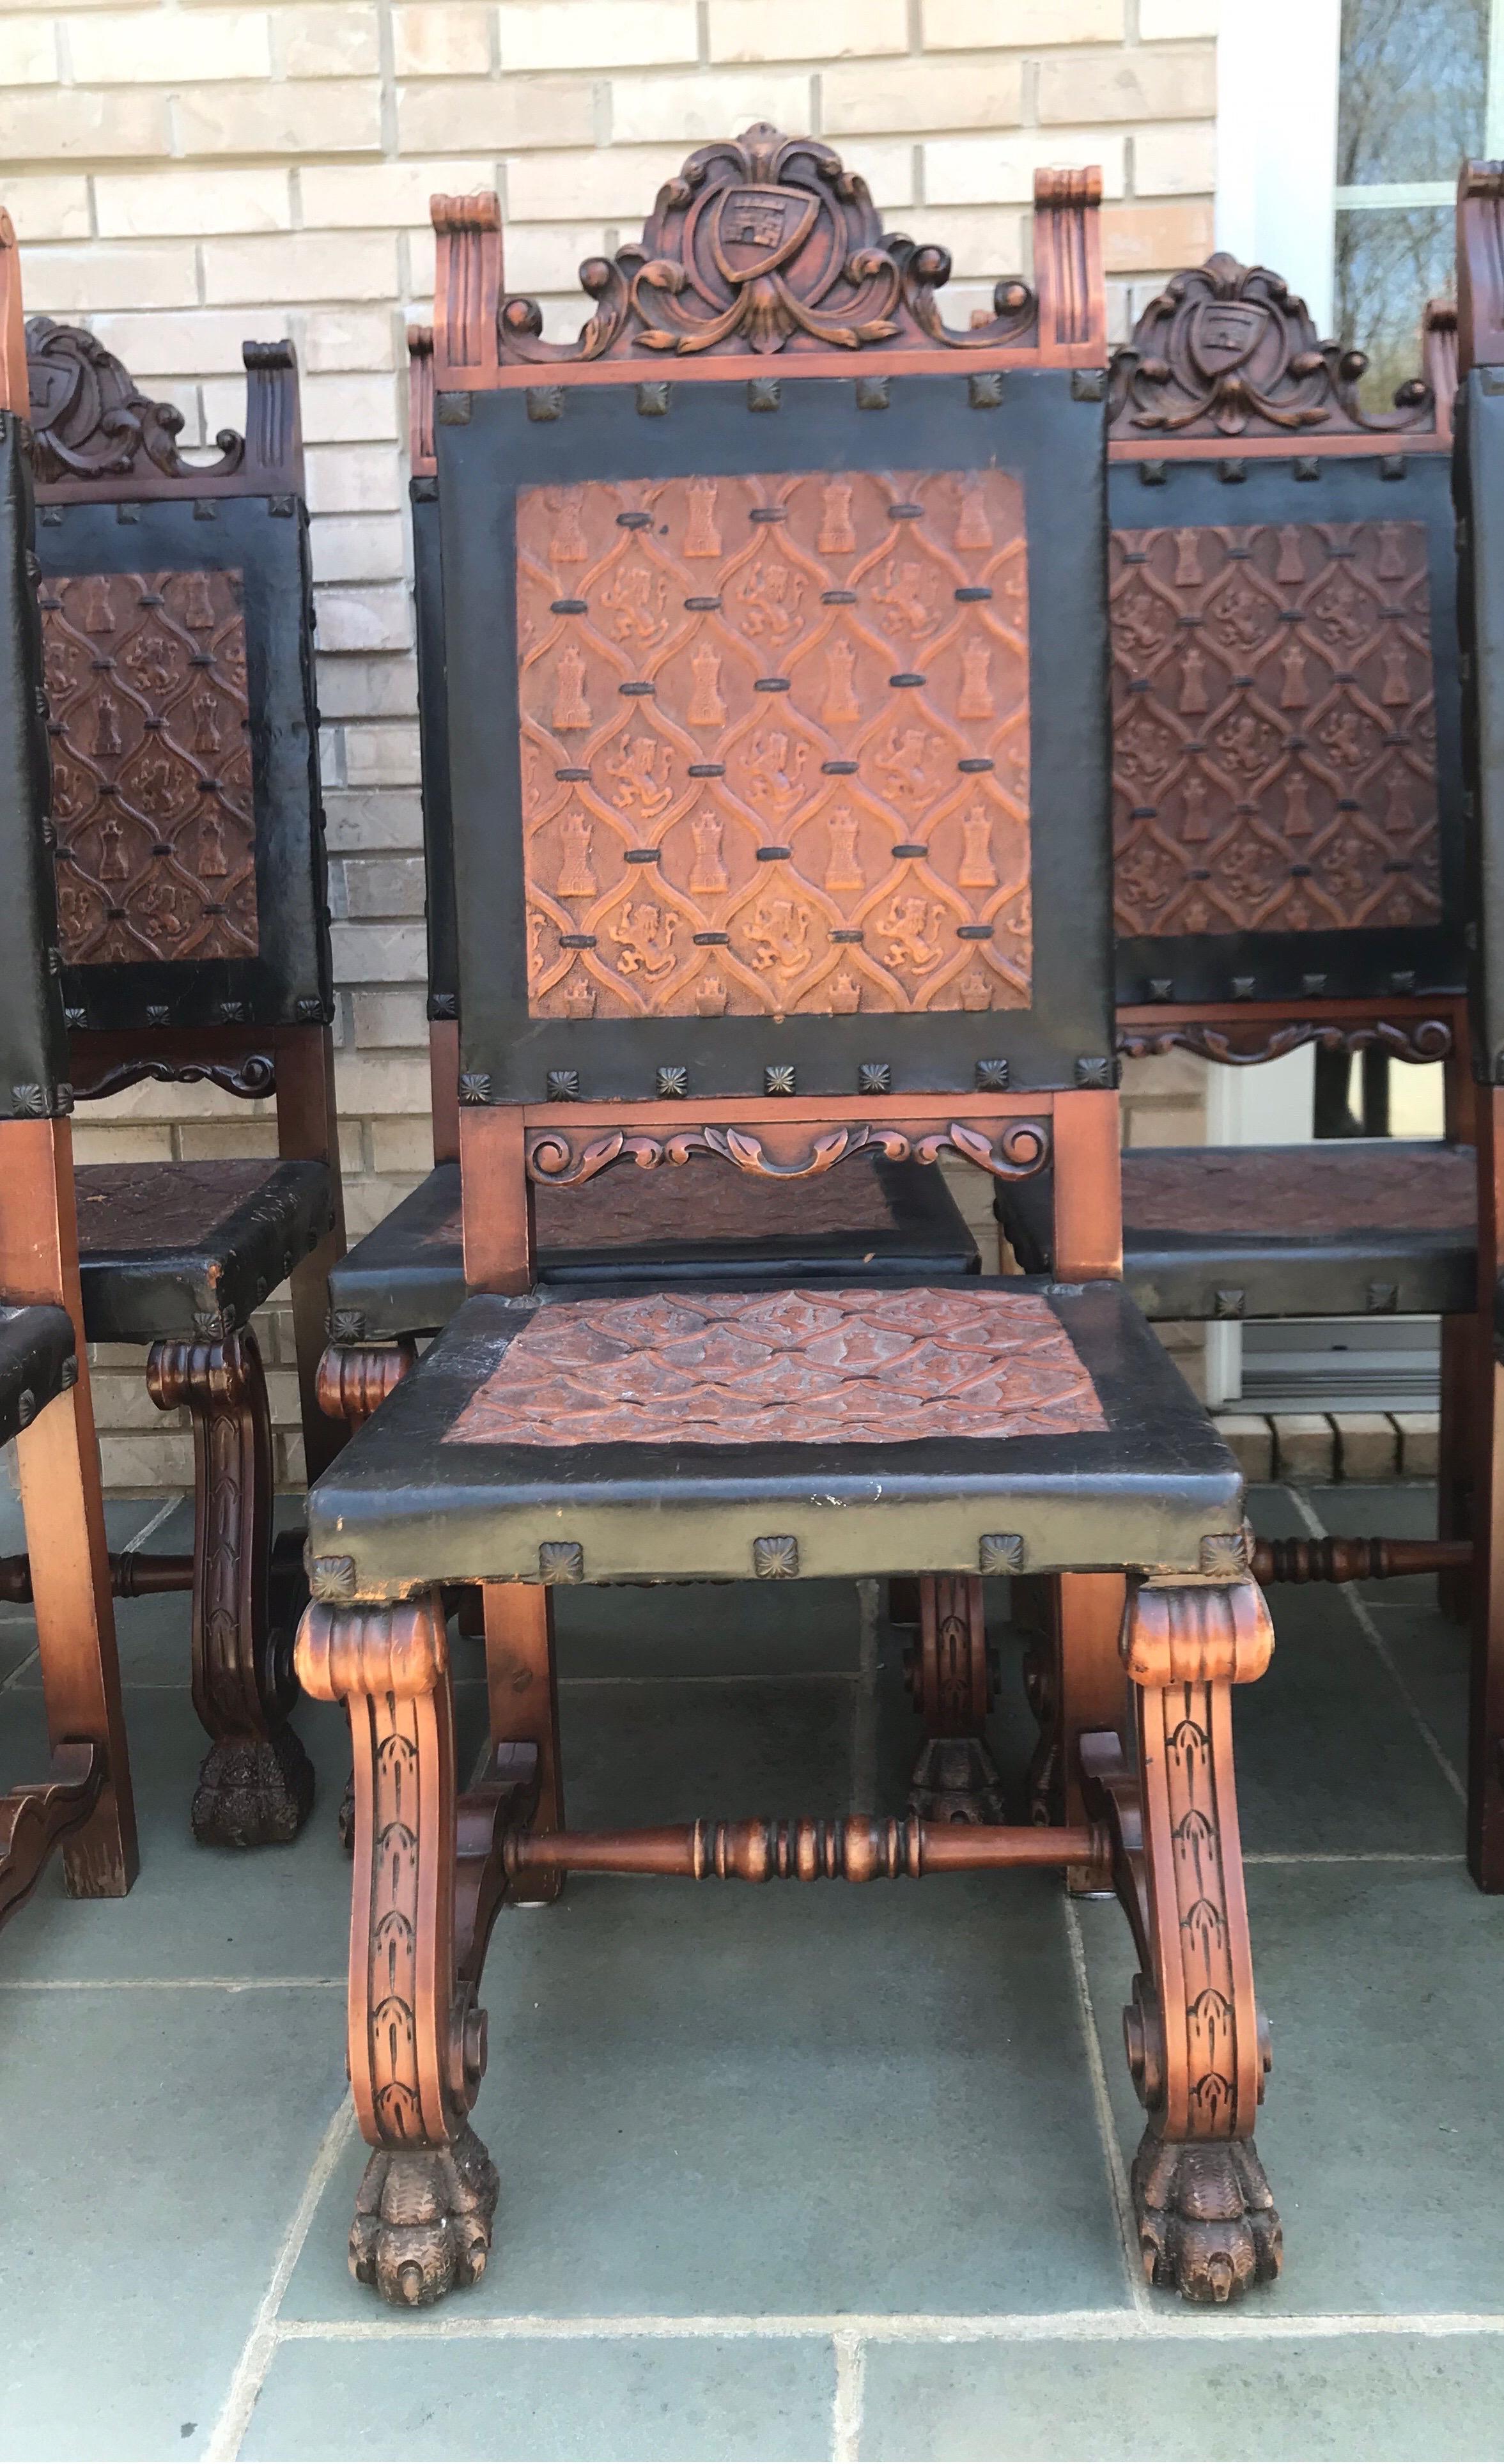 Set of 8 antique Renaissance-style dining chairs. These chairs are sturdy and feature lion’s feet, a crested shield at the top, and very unique embossed leather. The leather has medieval towers and lions. Large metal tacks finish off the details.